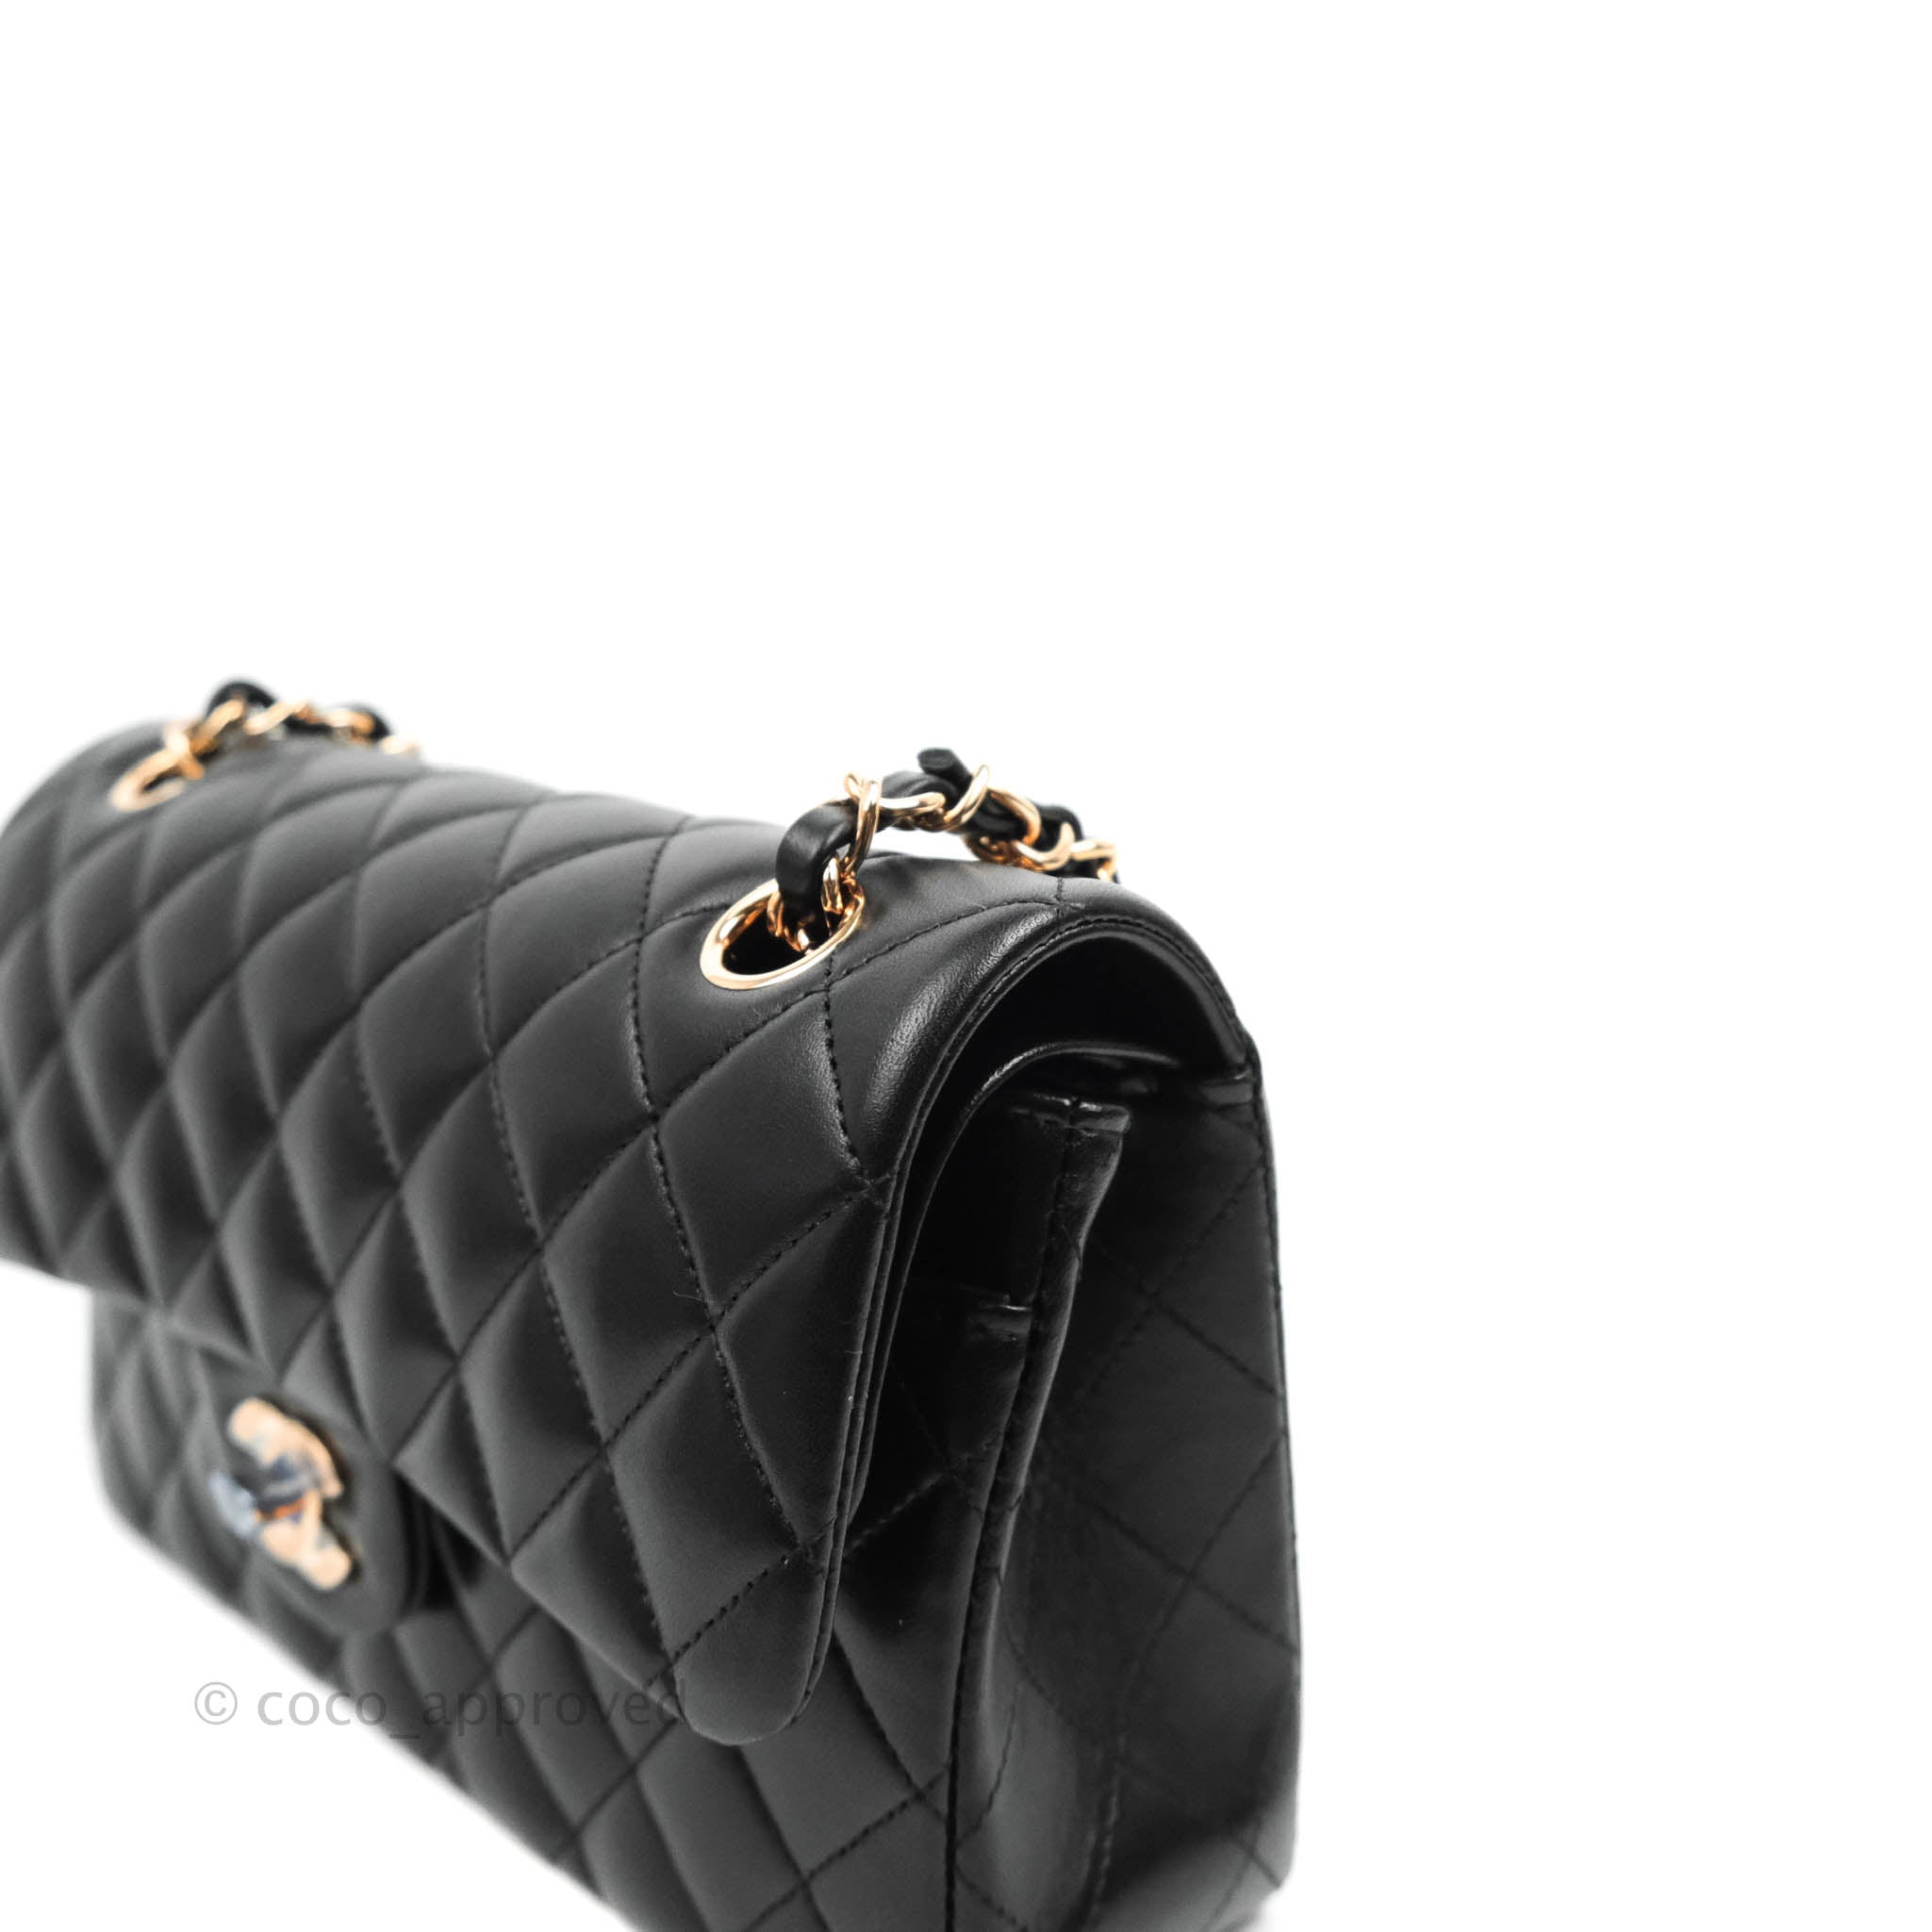 black chanel pouch pink